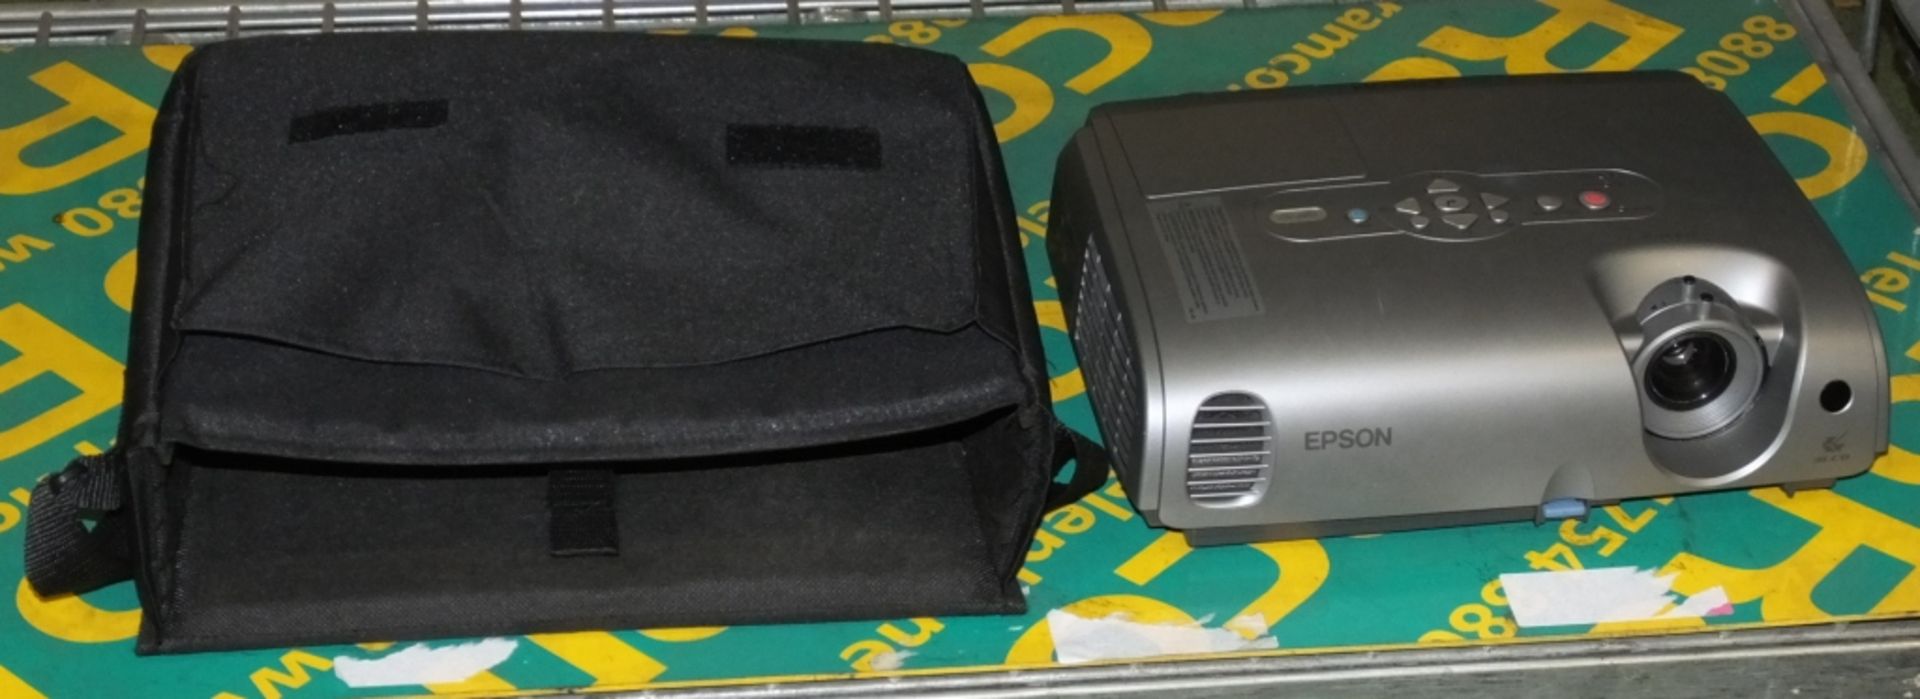 Epson EMP-82 LCD Projector with carry bag